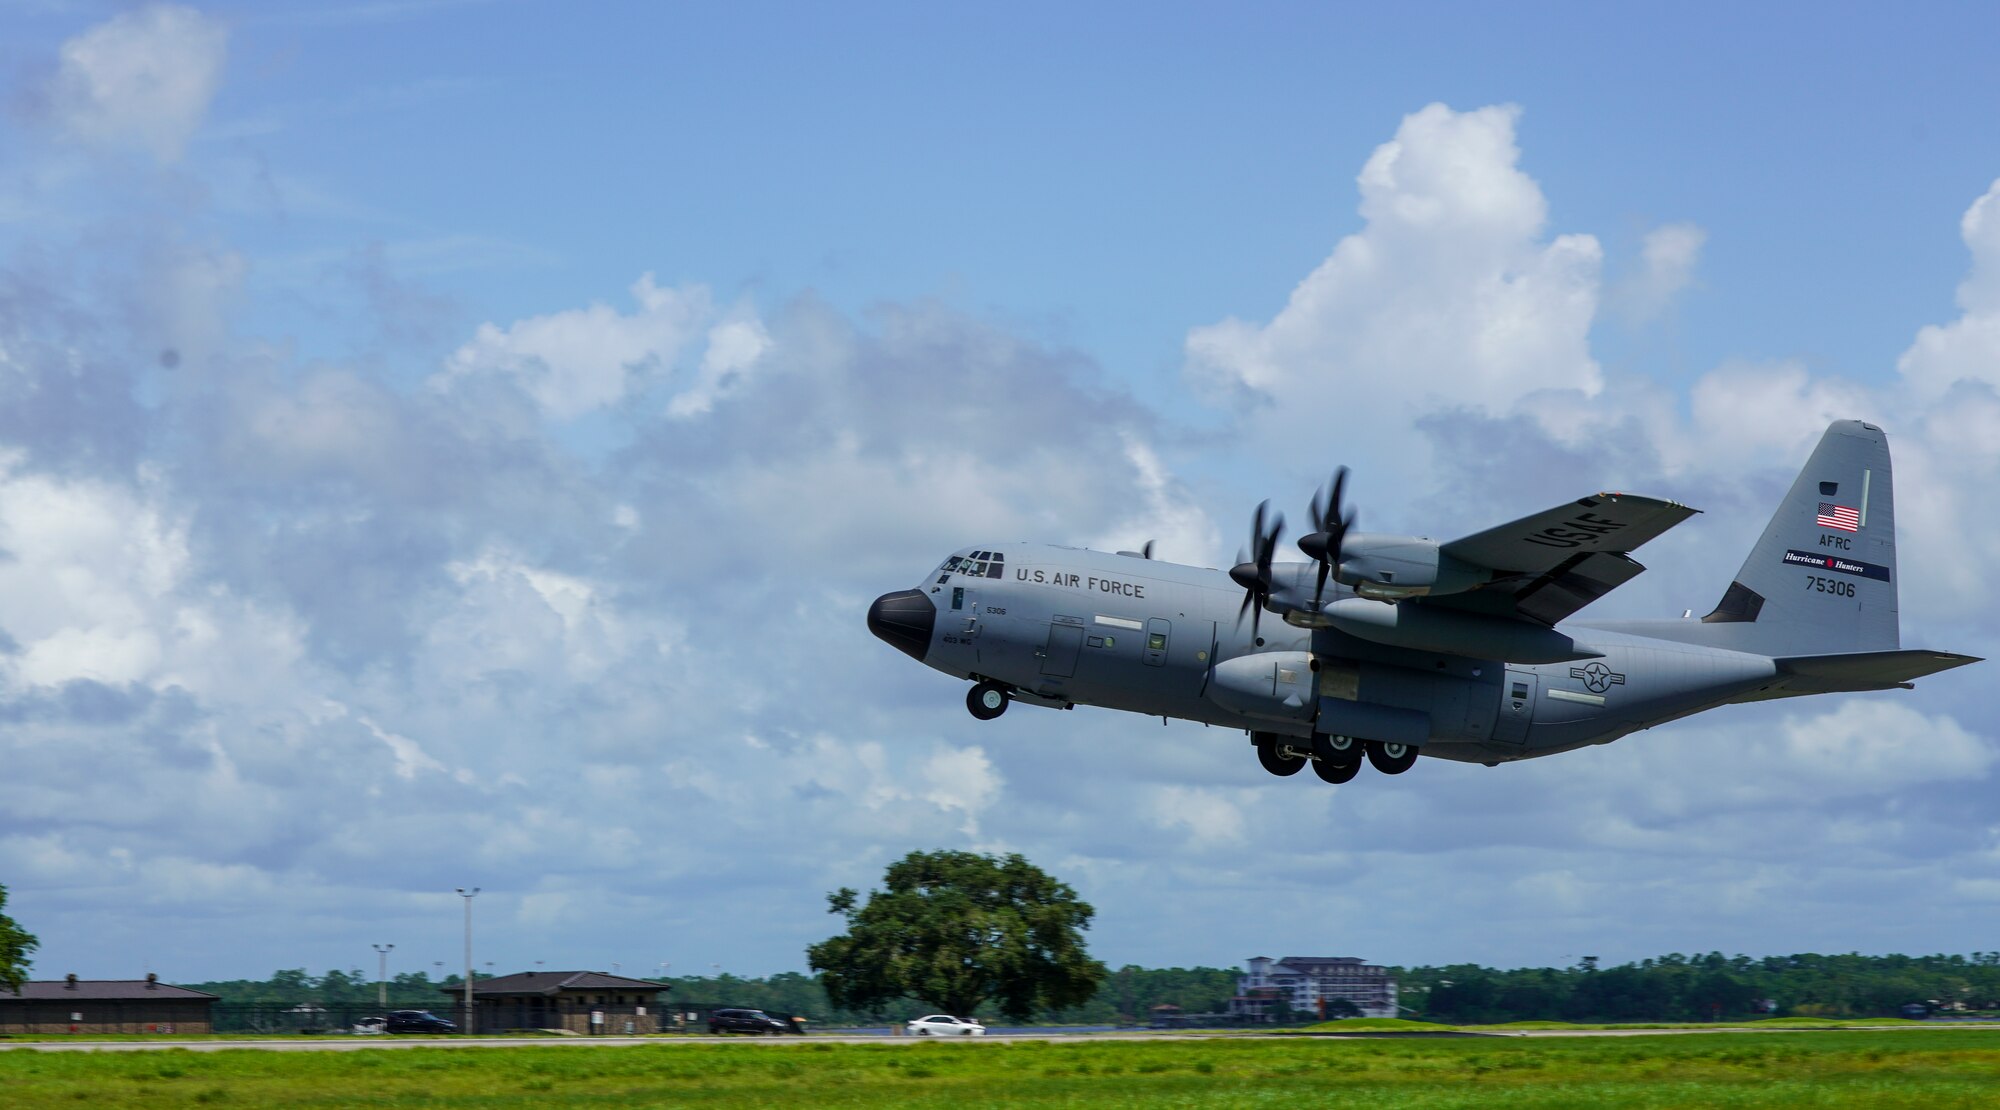 A WC-130J Super Hercules aircraft assigned to the 53rd Weather Reconnaissance Squadron at Keesler Air Force Base, Miss., takes off for its functional check flight July 13, 2021. This particular aircraft took off after months of extensive repairs to its wing caused by a fire that left a basketball-sized hole in the wing. (U.S. Air Force photo by 2nd Lt. Christopher Carranza)